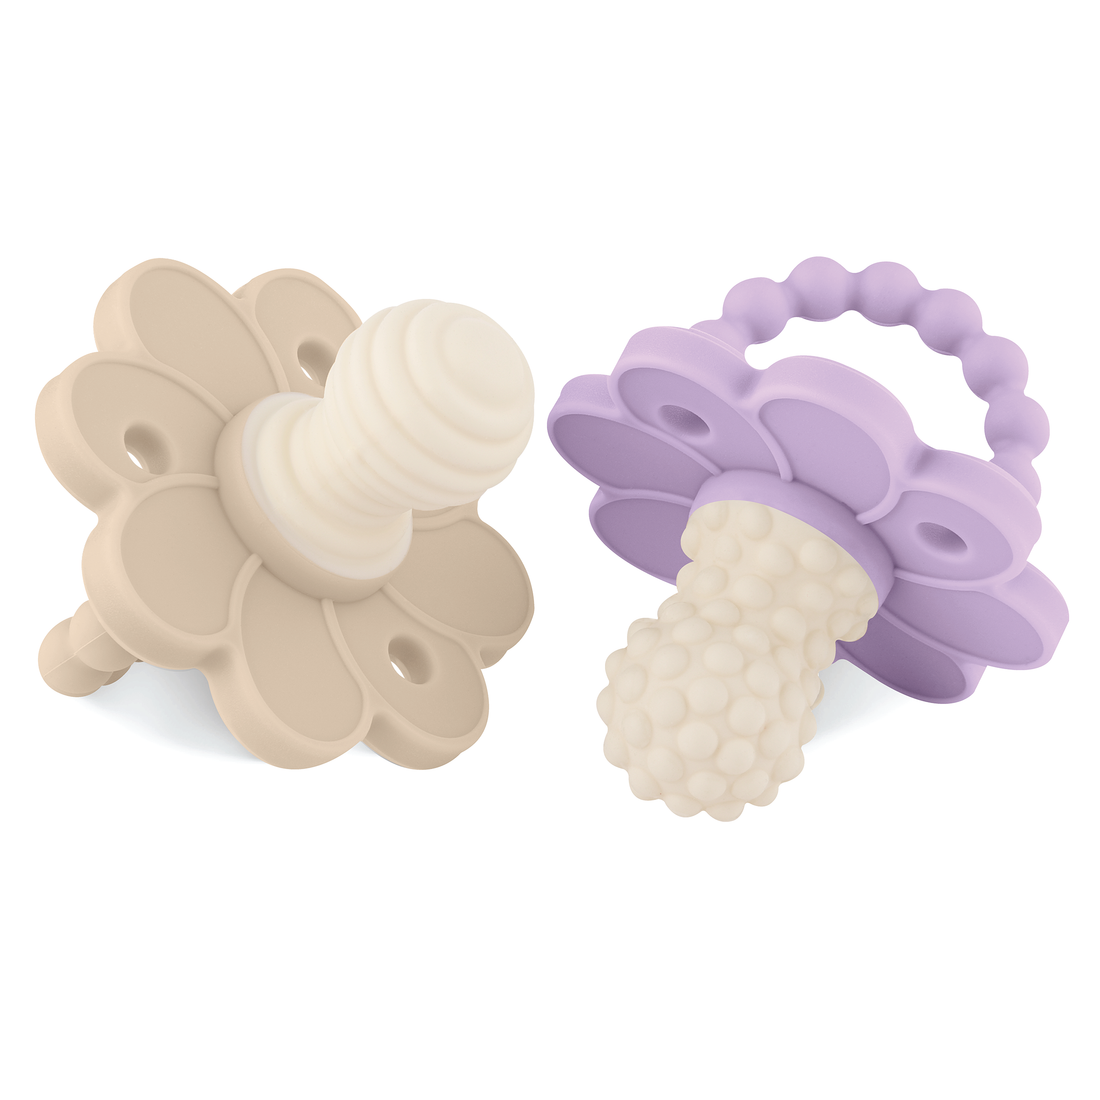 Beige and Lavender SoothiPop Silicone Teething Pacifier Flower Shaped (2 Pack) - Beige and Lavender by Smooch Babies sold by Smooch Babies